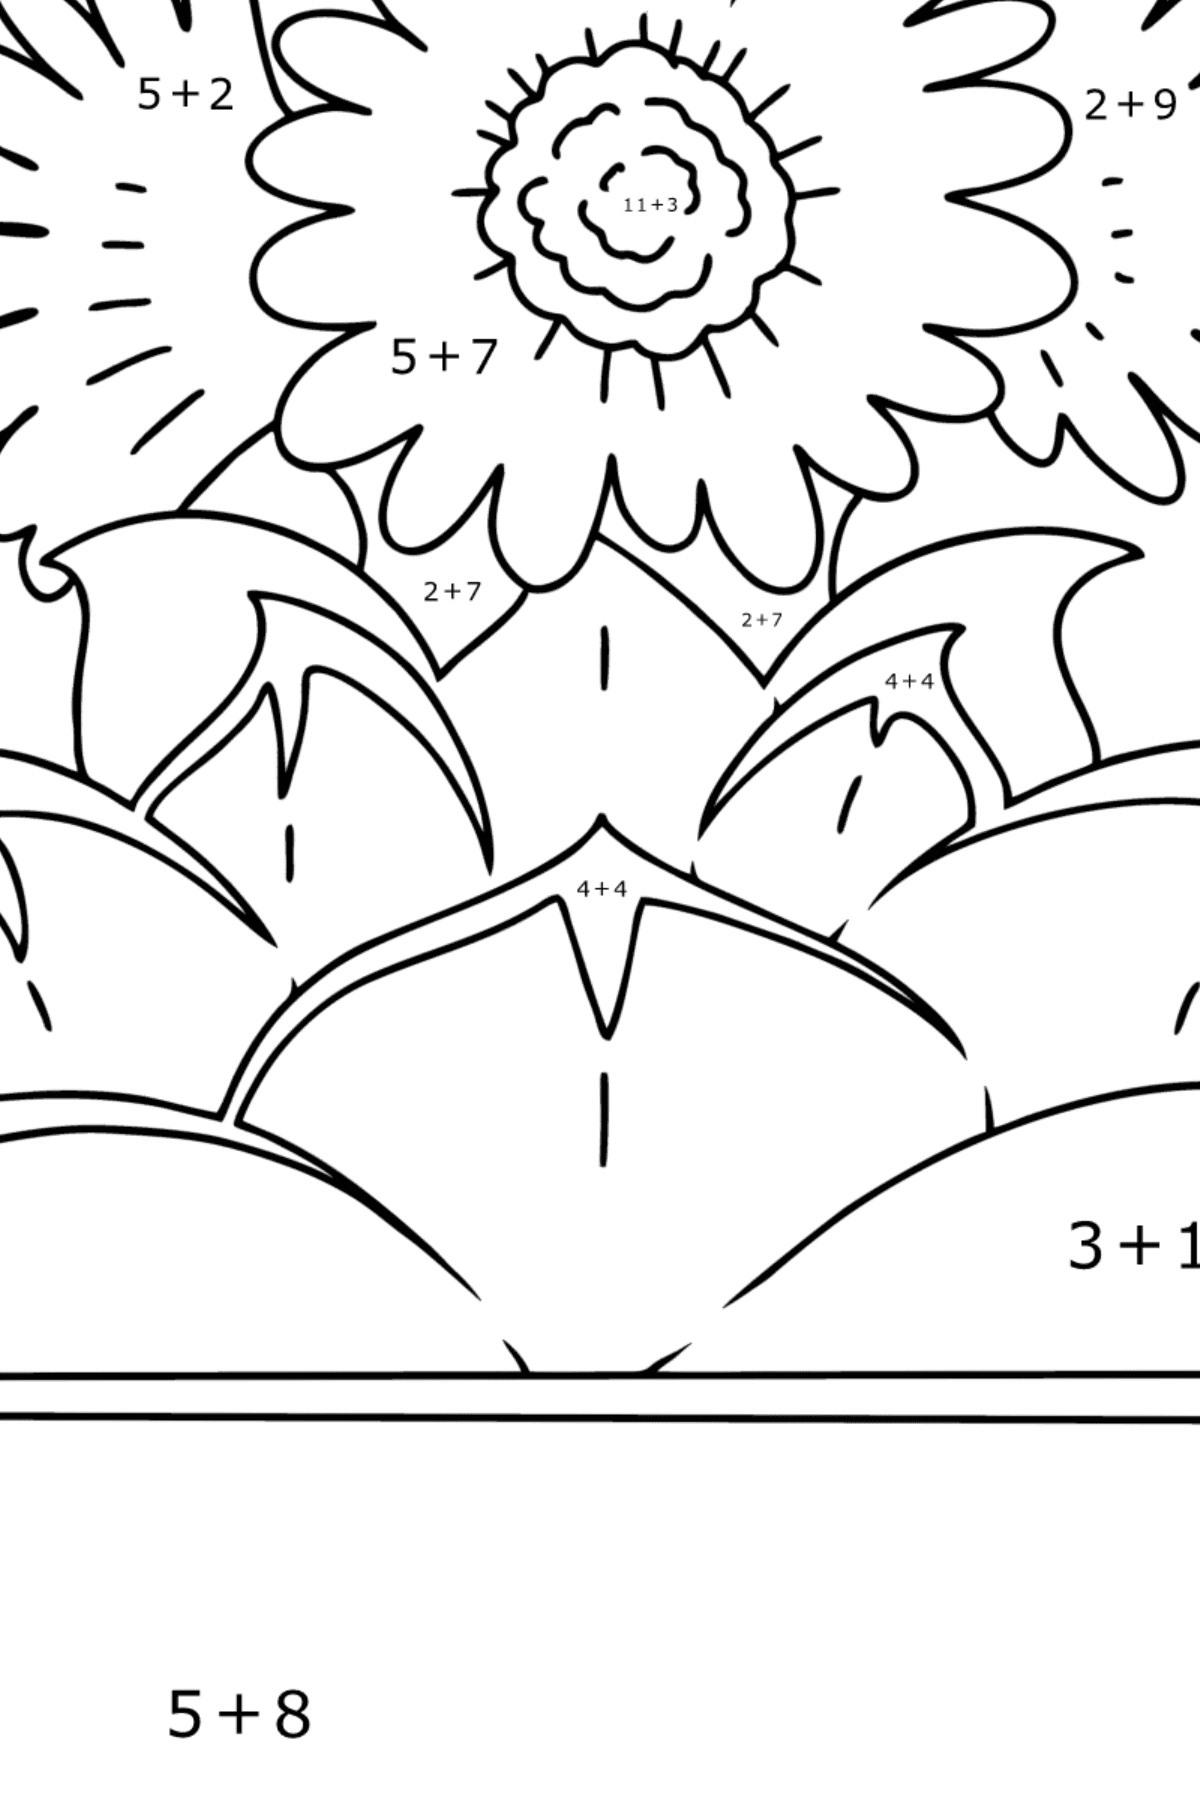 Echinocactus Grusonii coloring page - Math Coloring - Addition for Kids